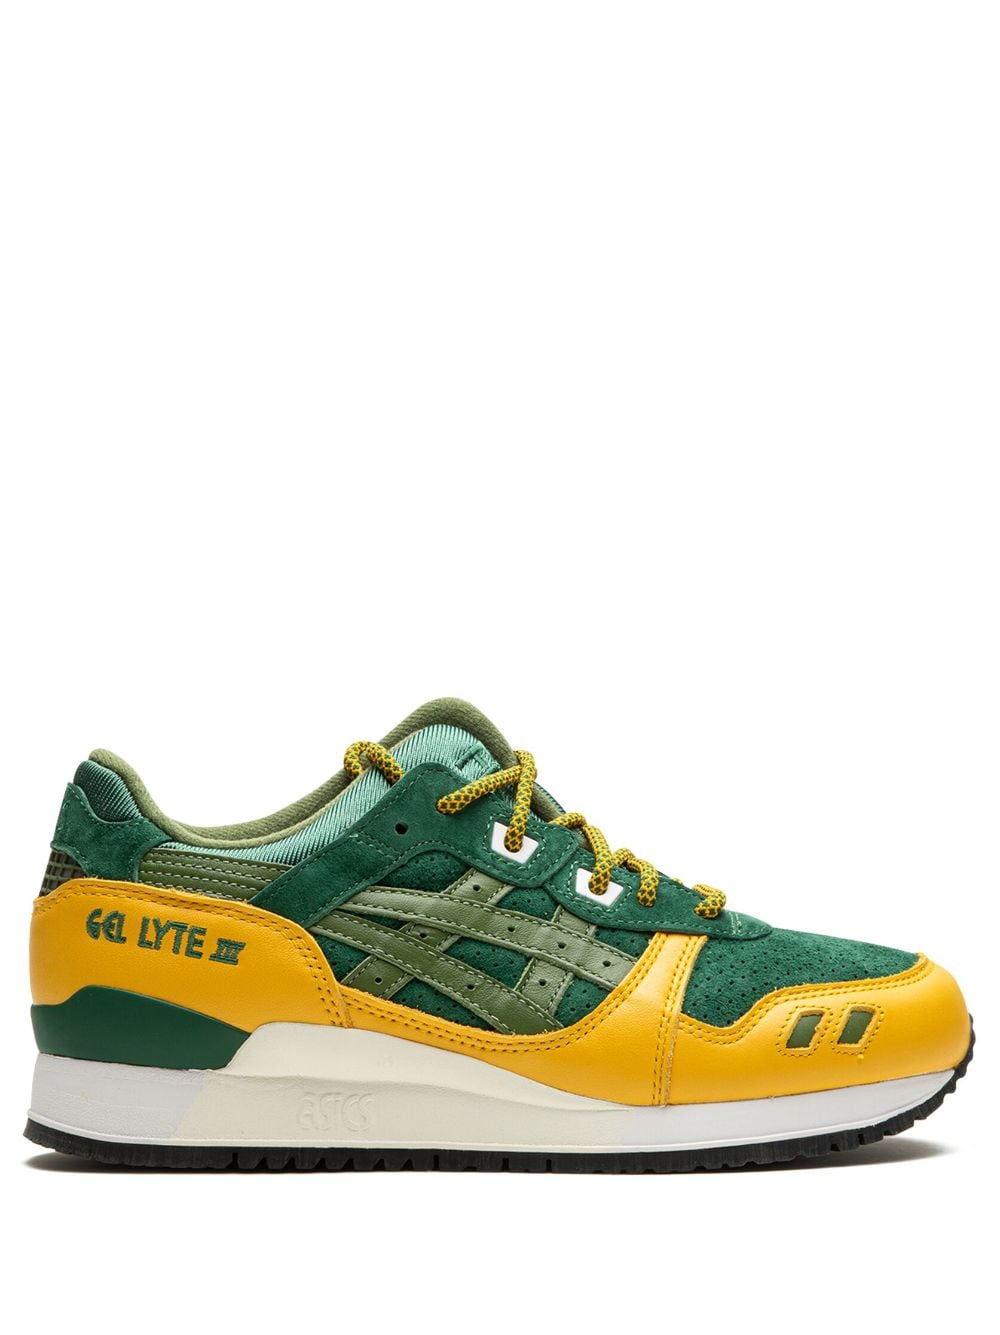 Asics Gel Lyte Iii 07 Remastered "rogue" Sneakers In Green